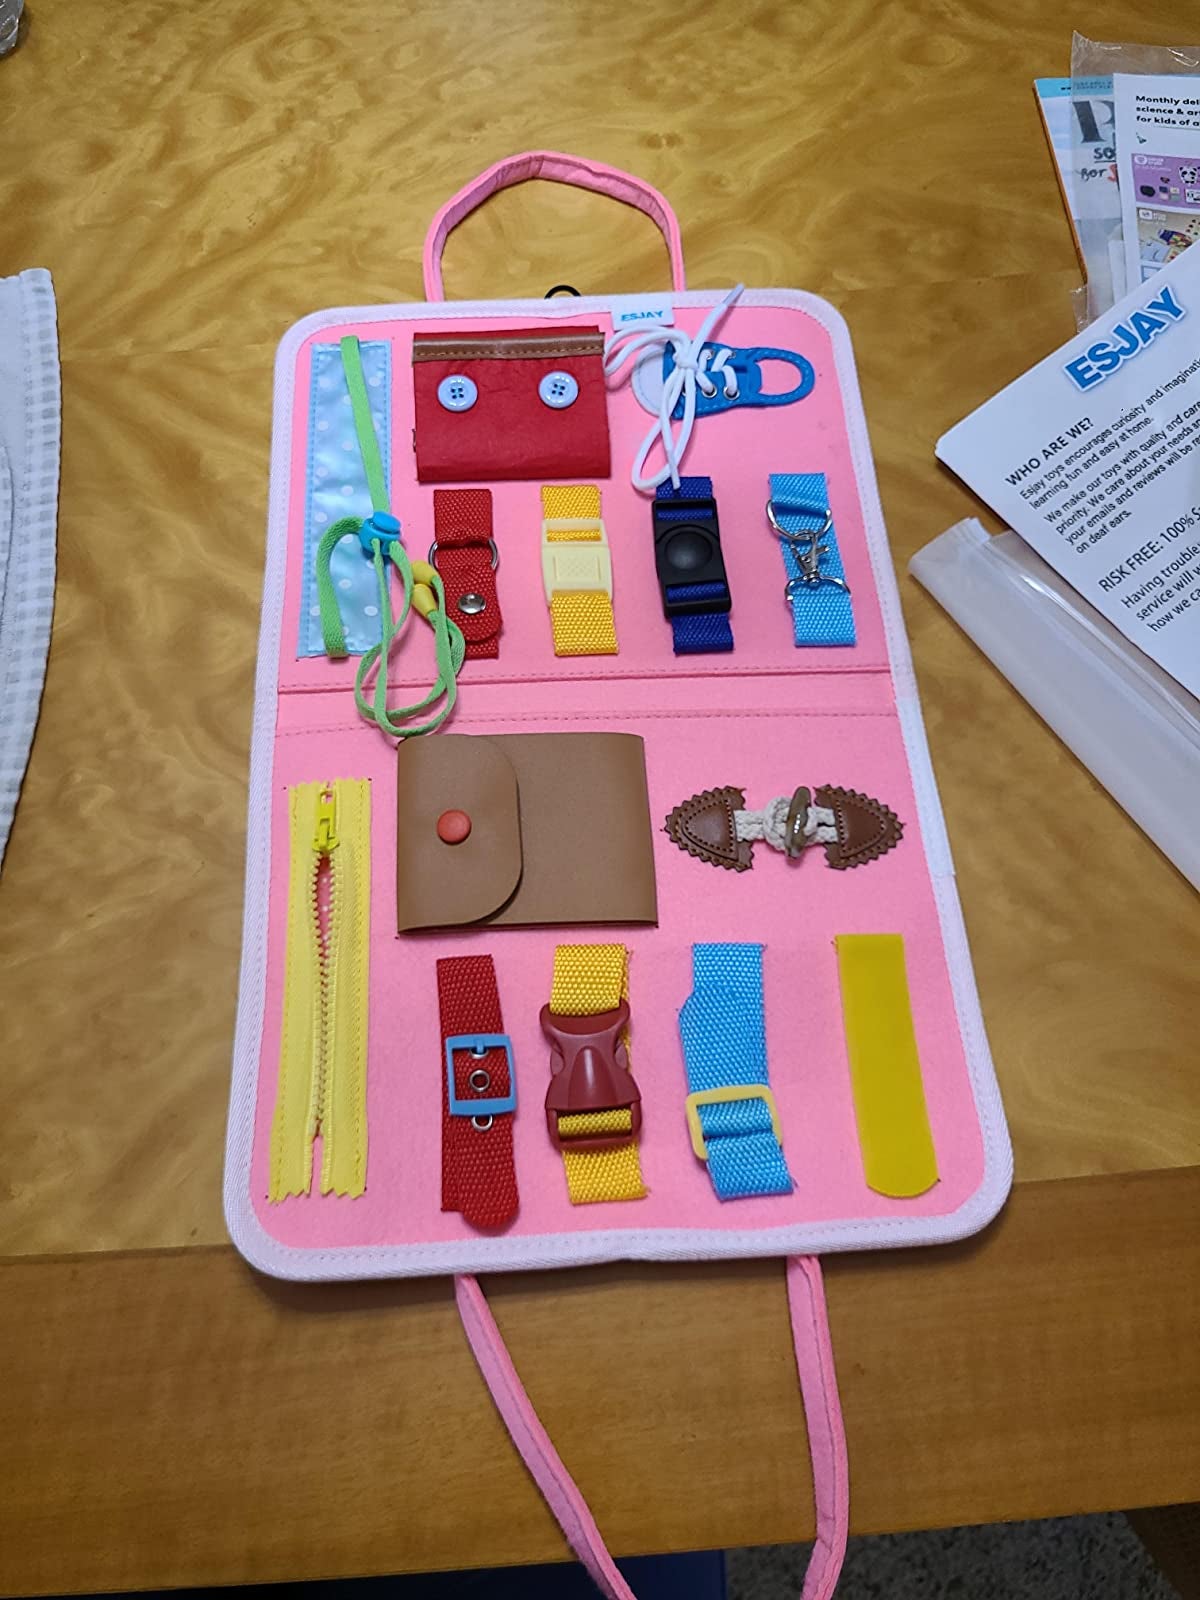 An activity board with zippers, buckles, and snap enclosures